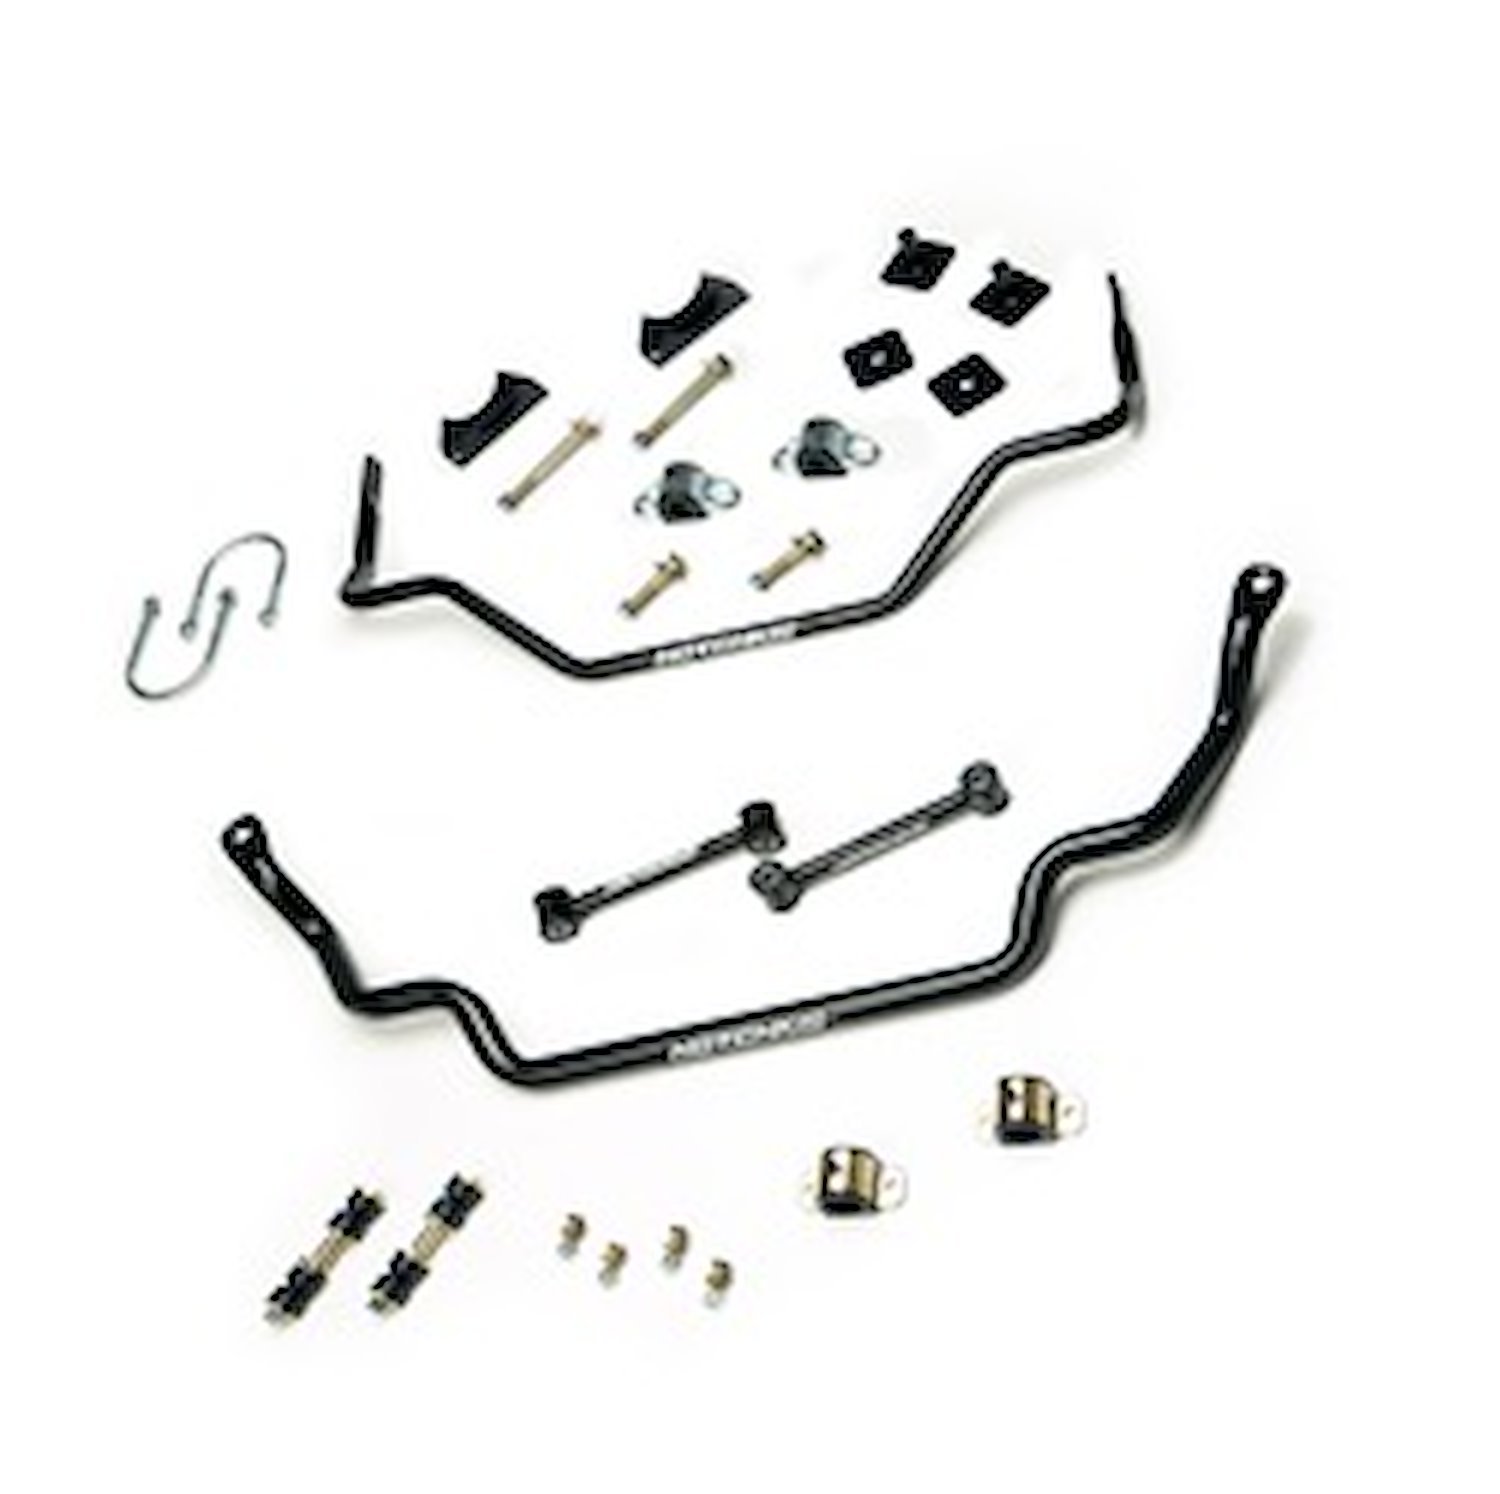 22115 1967 - 1970 Mustang Sway Bar Set from Hotchkis Sport Suspension